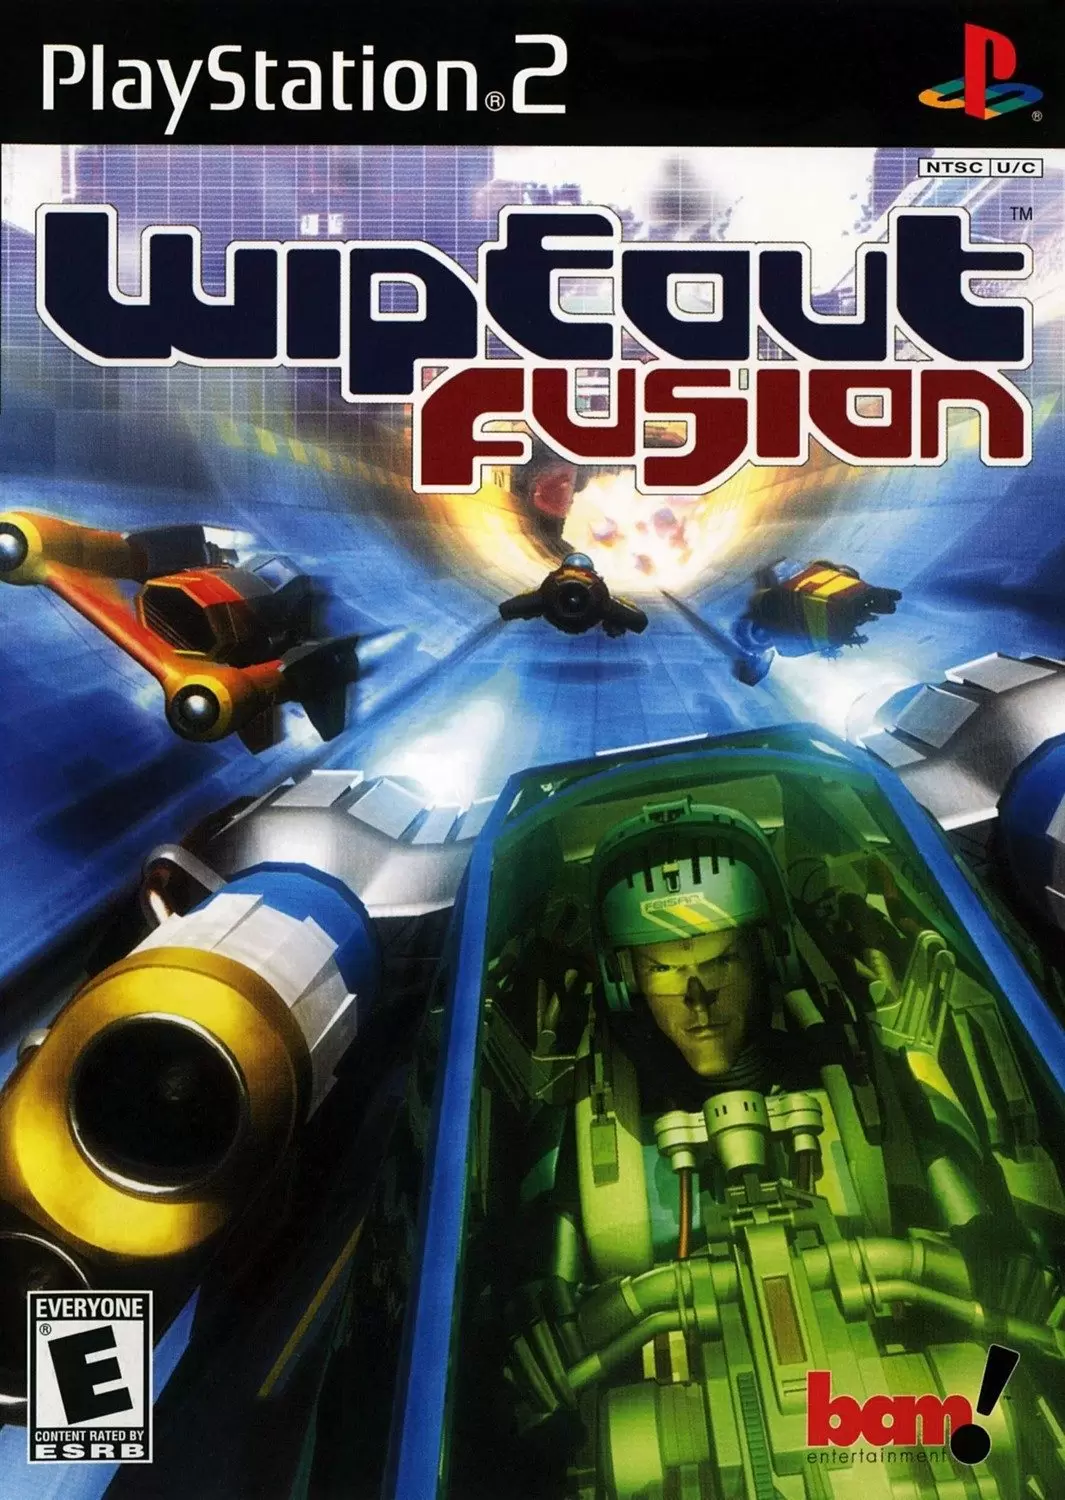 PS2 Games - WipEout Fusion